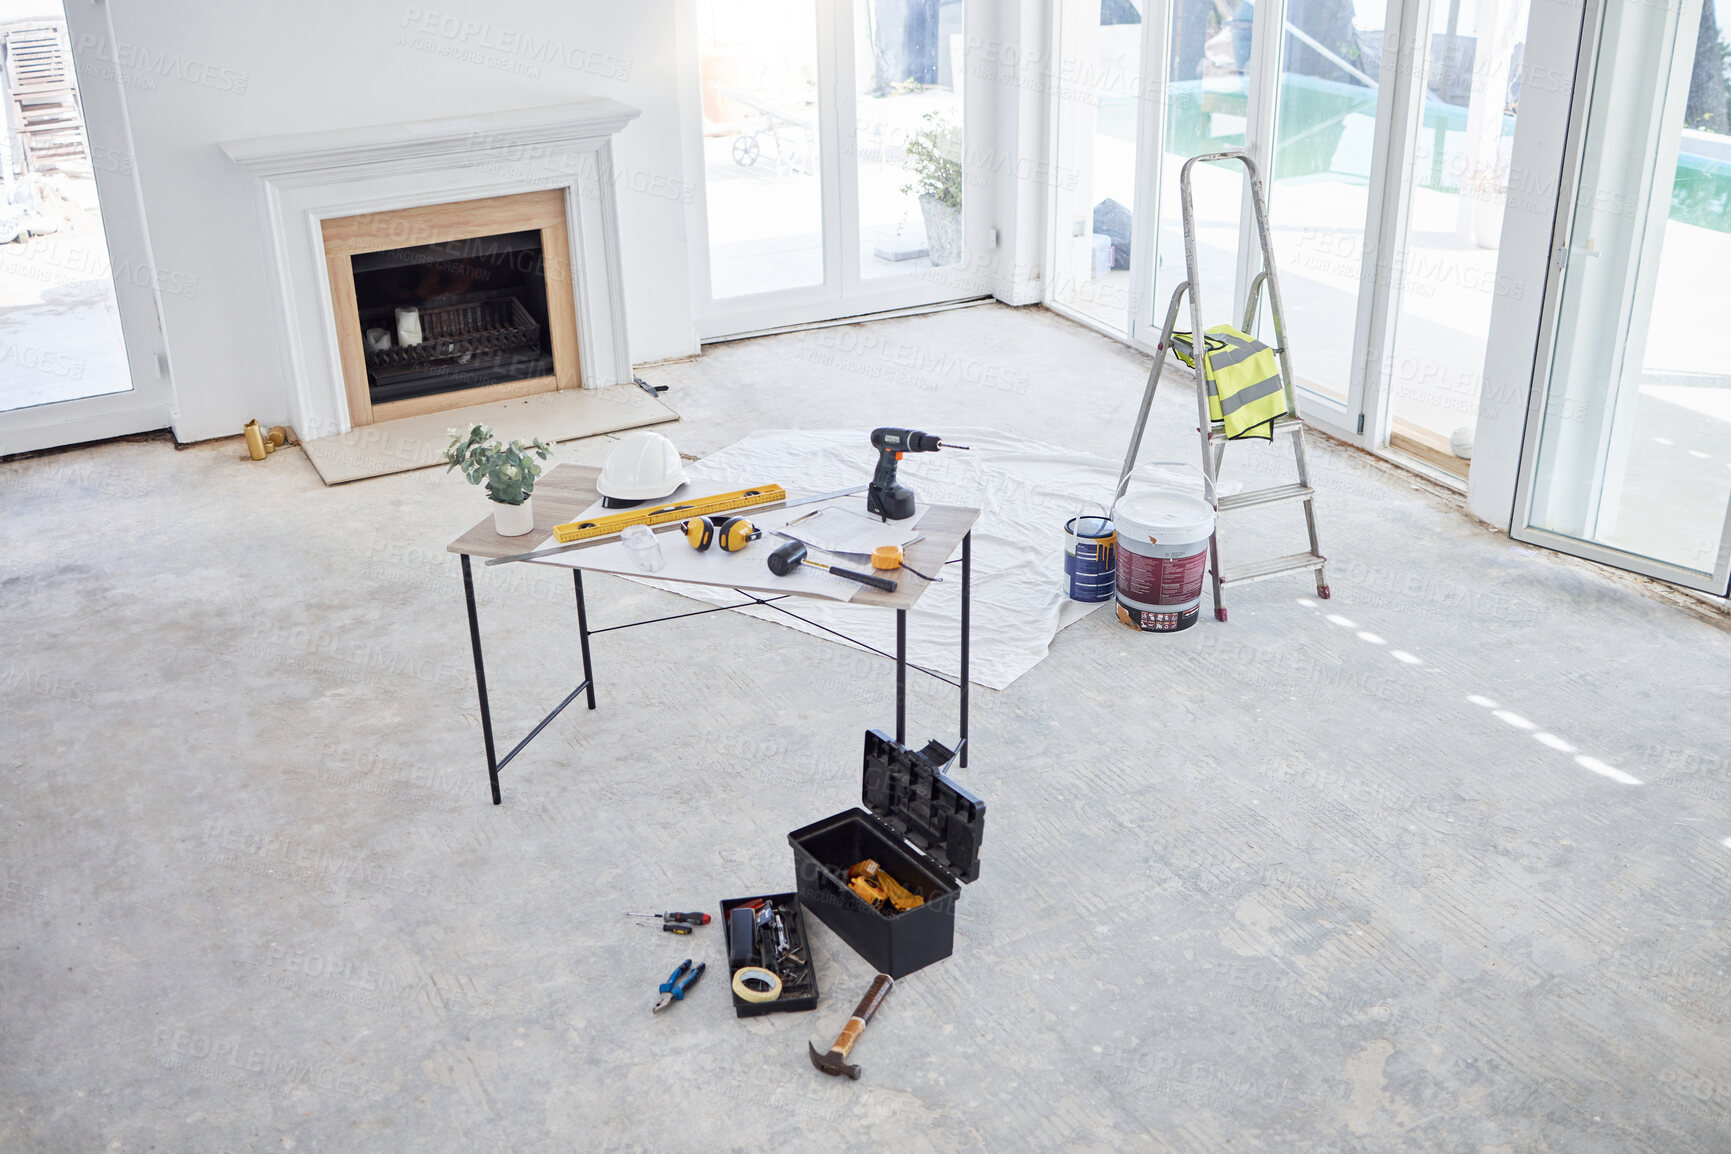 Buy stock photo High angle shot of building plans and equipment on a table in an empty living room during the day